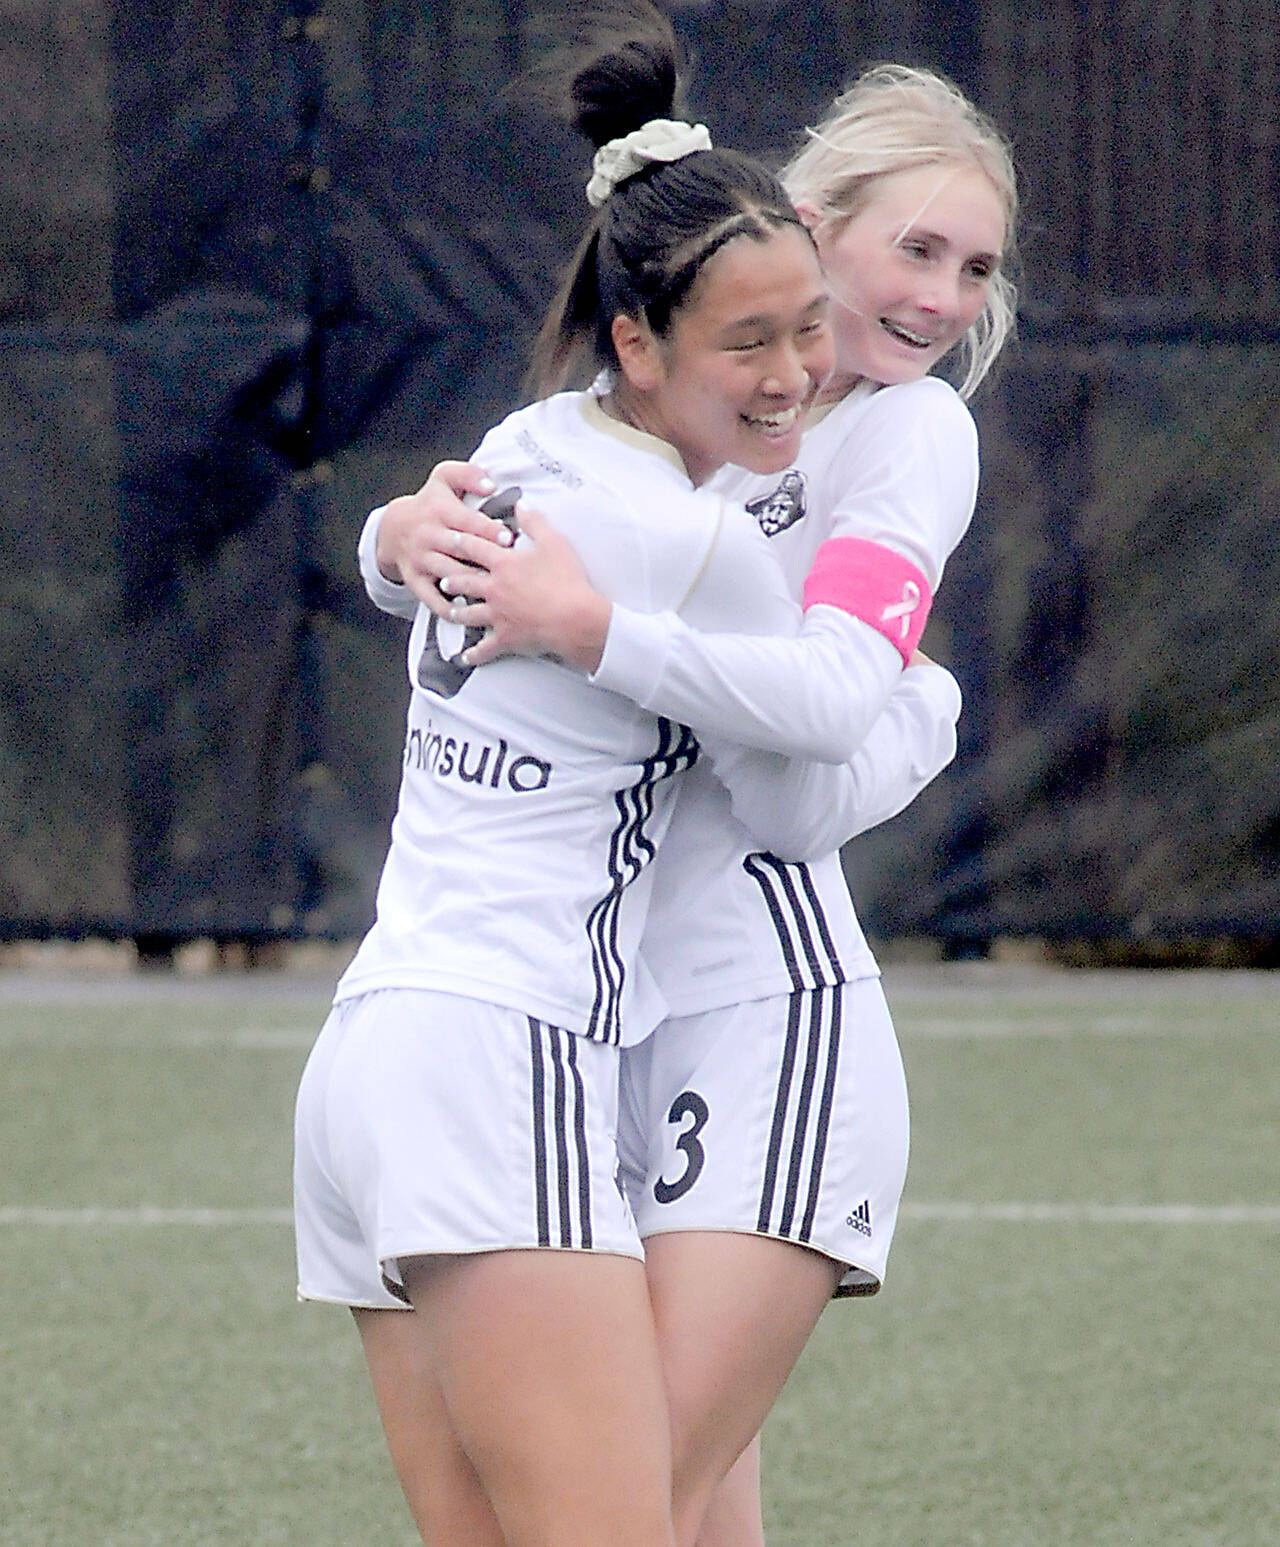 KEITH THORPE/PENINSULA DAILY NEWS
Peninsula's Chiaki Takase, right, celebrates making a goal with teammate Millie Long, who had scored two goals earlier against Bellevue on Wednesday at Peninsula College.